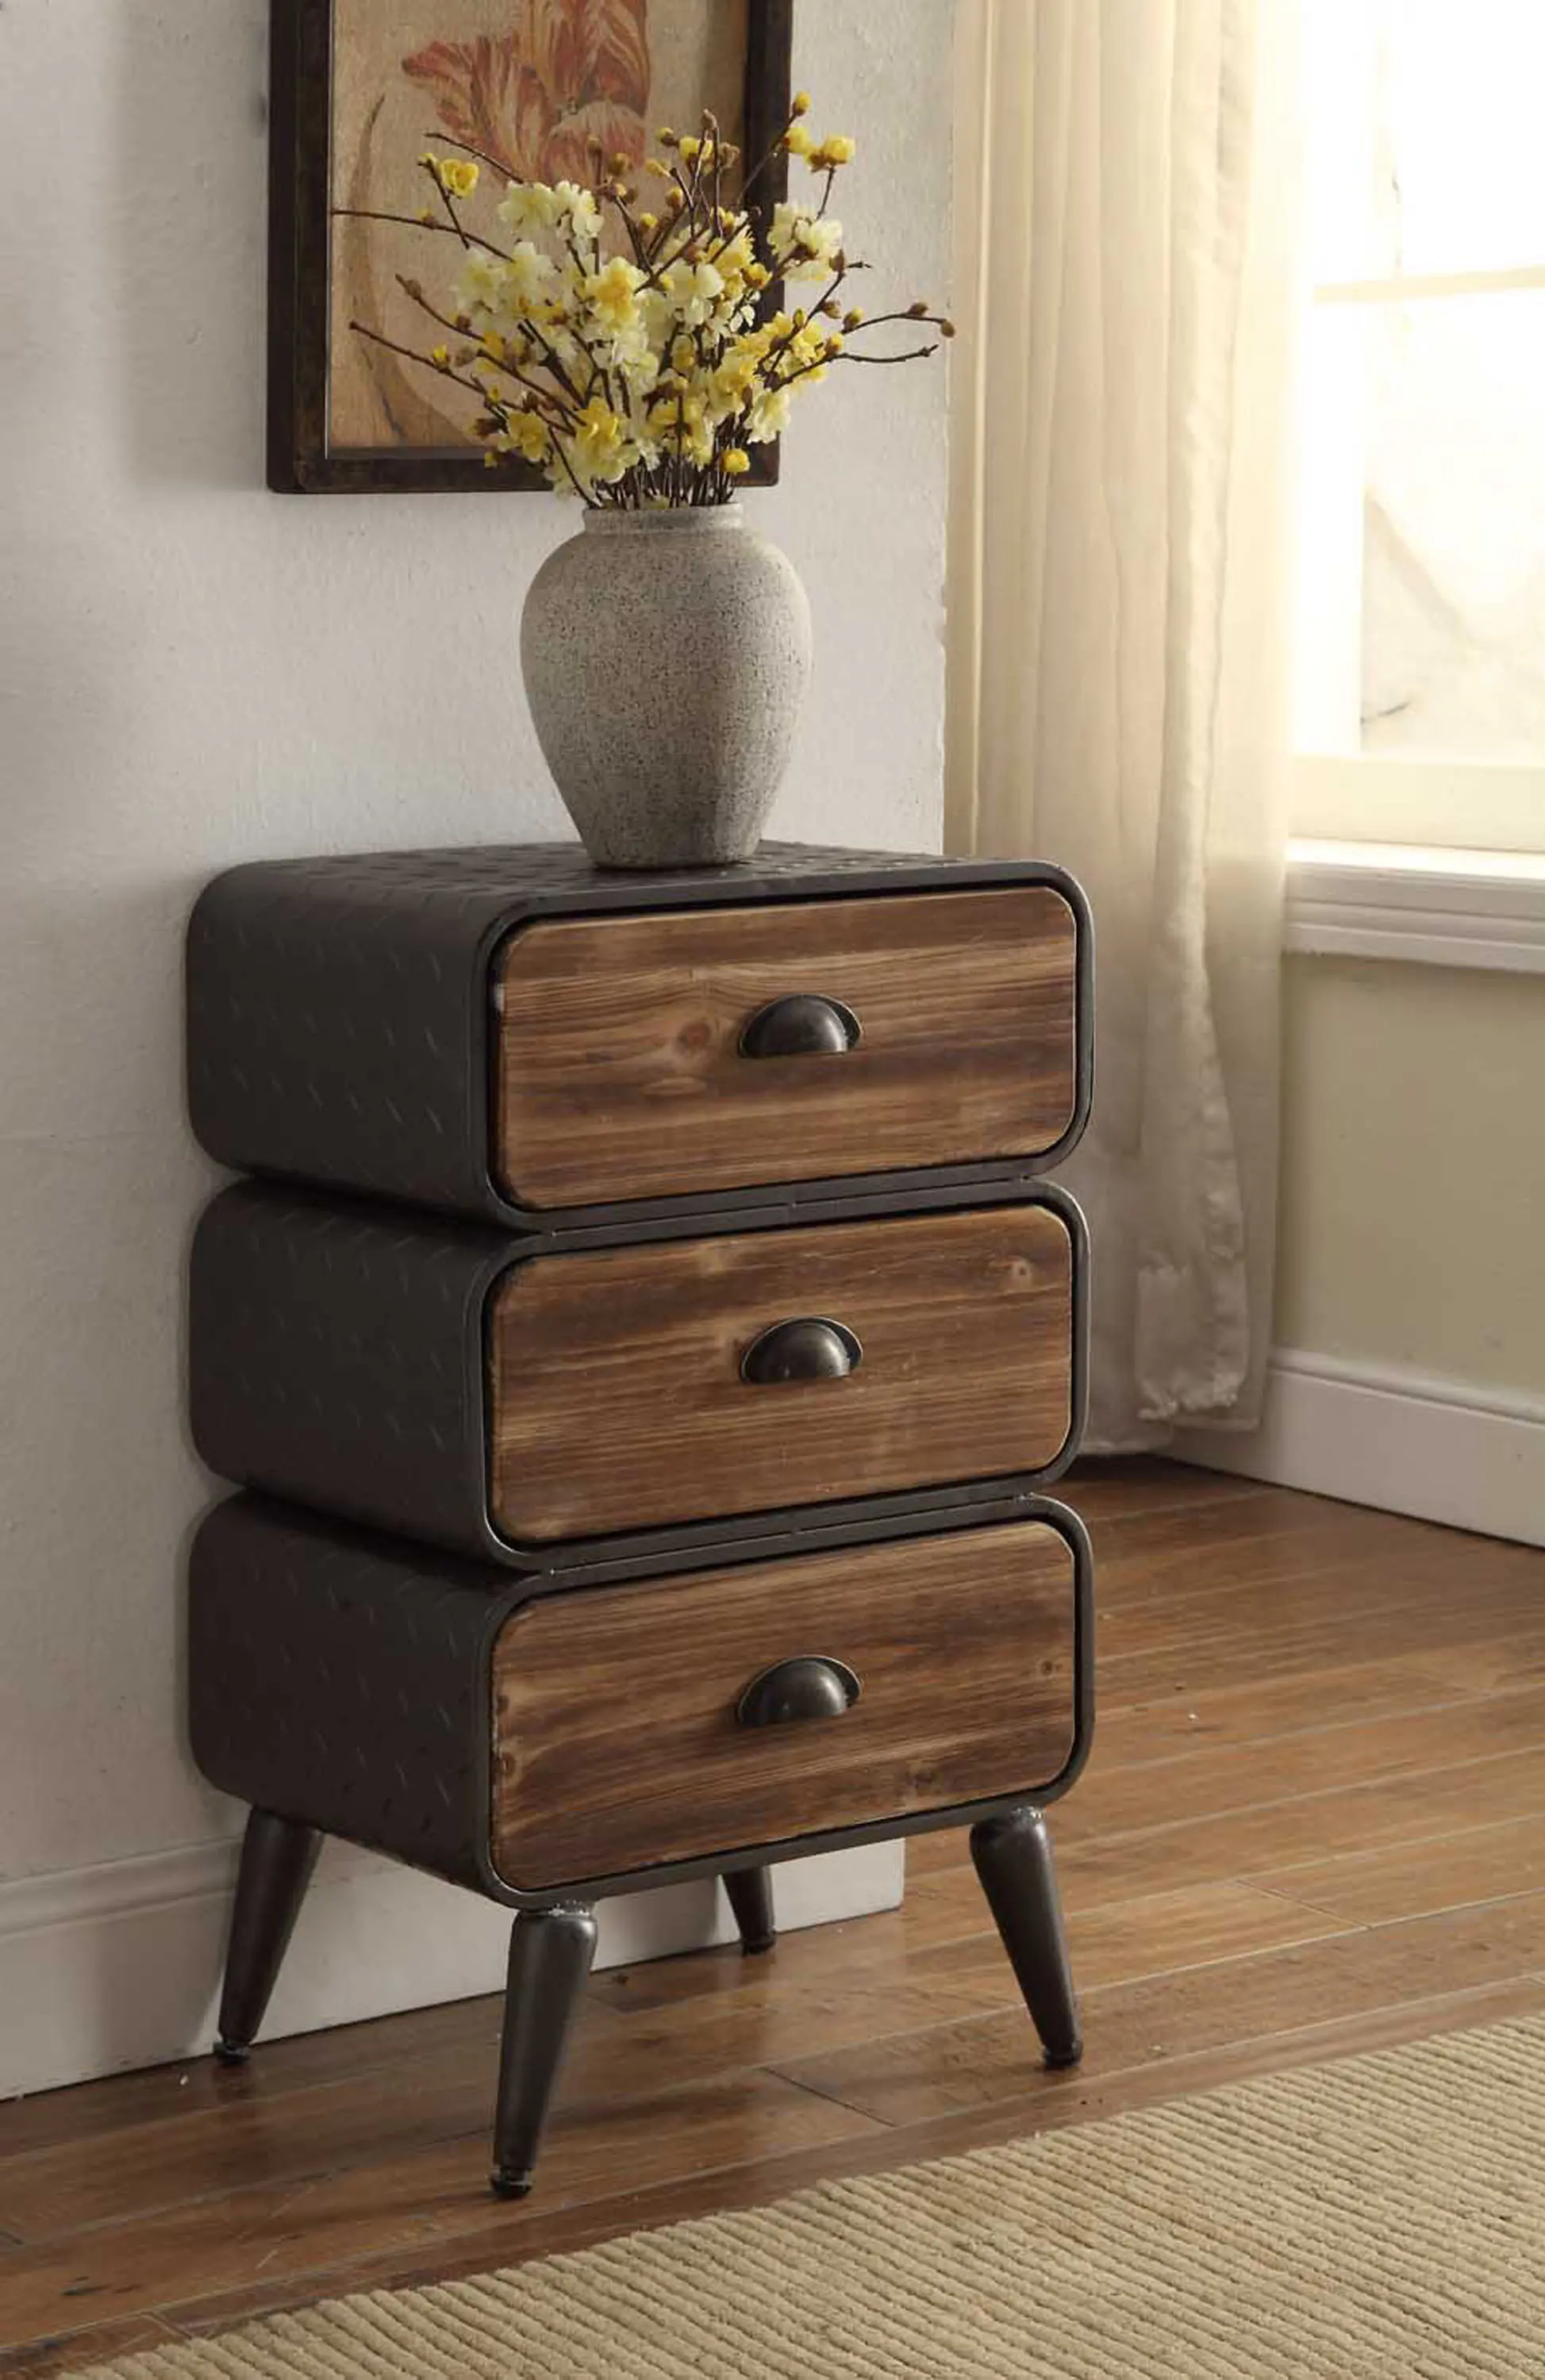 Photos - Other Furniture 4D Concepts Modern Industrial Metal and Pine 3-Drawer Chest - Urban Loft 1